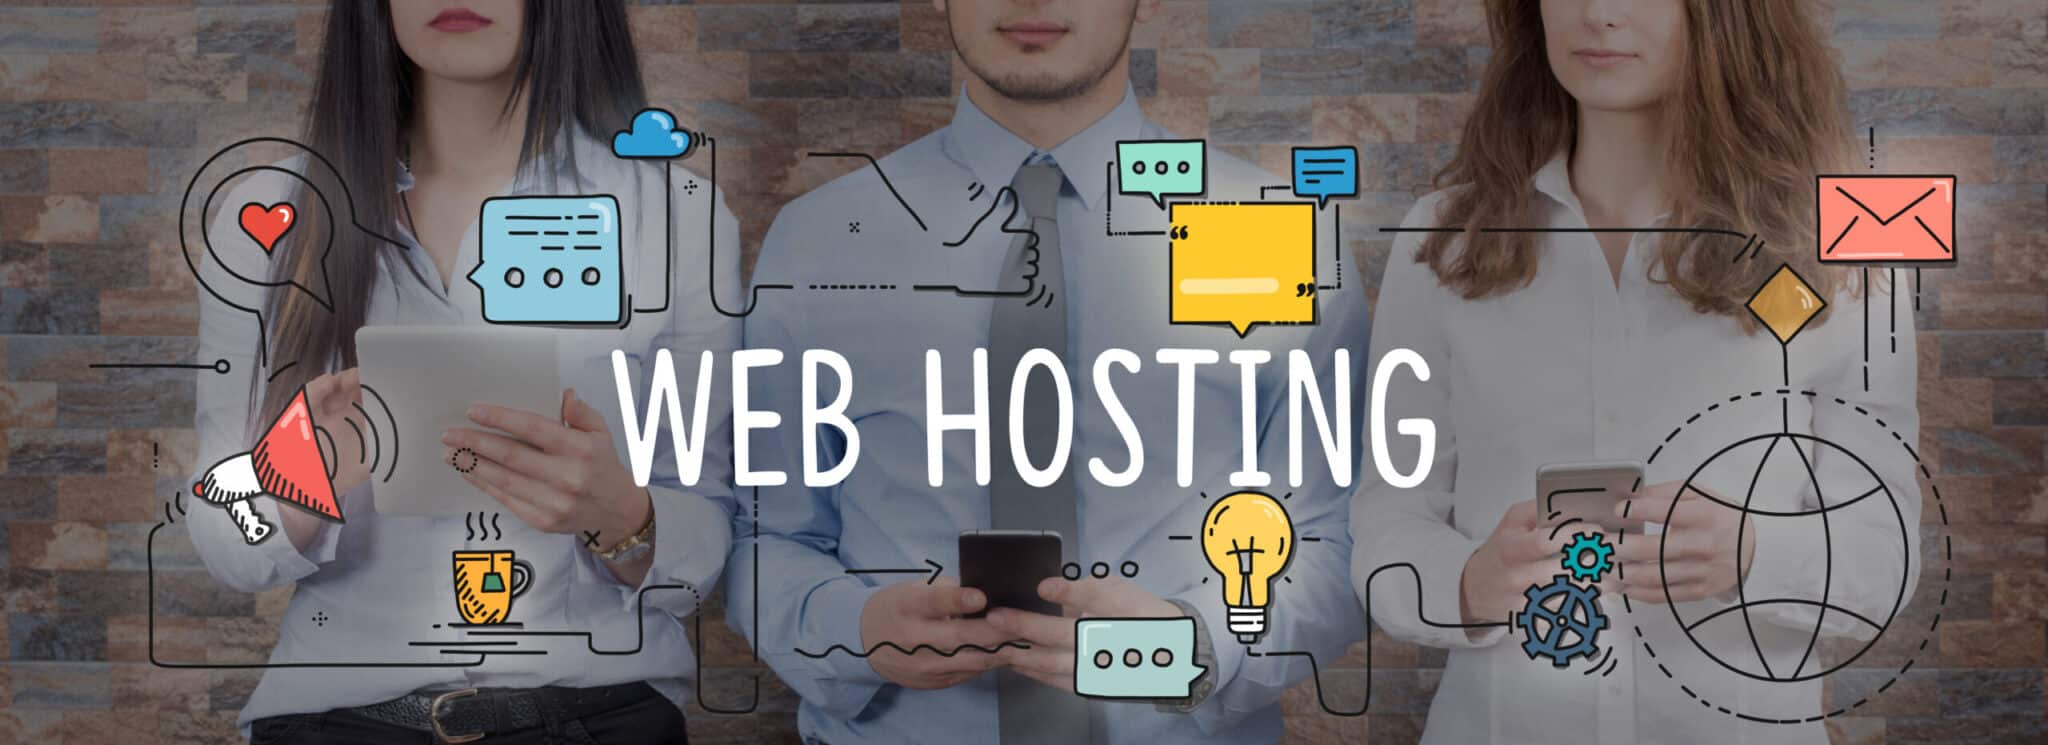 How to Host Your Own Website - Web Hosting